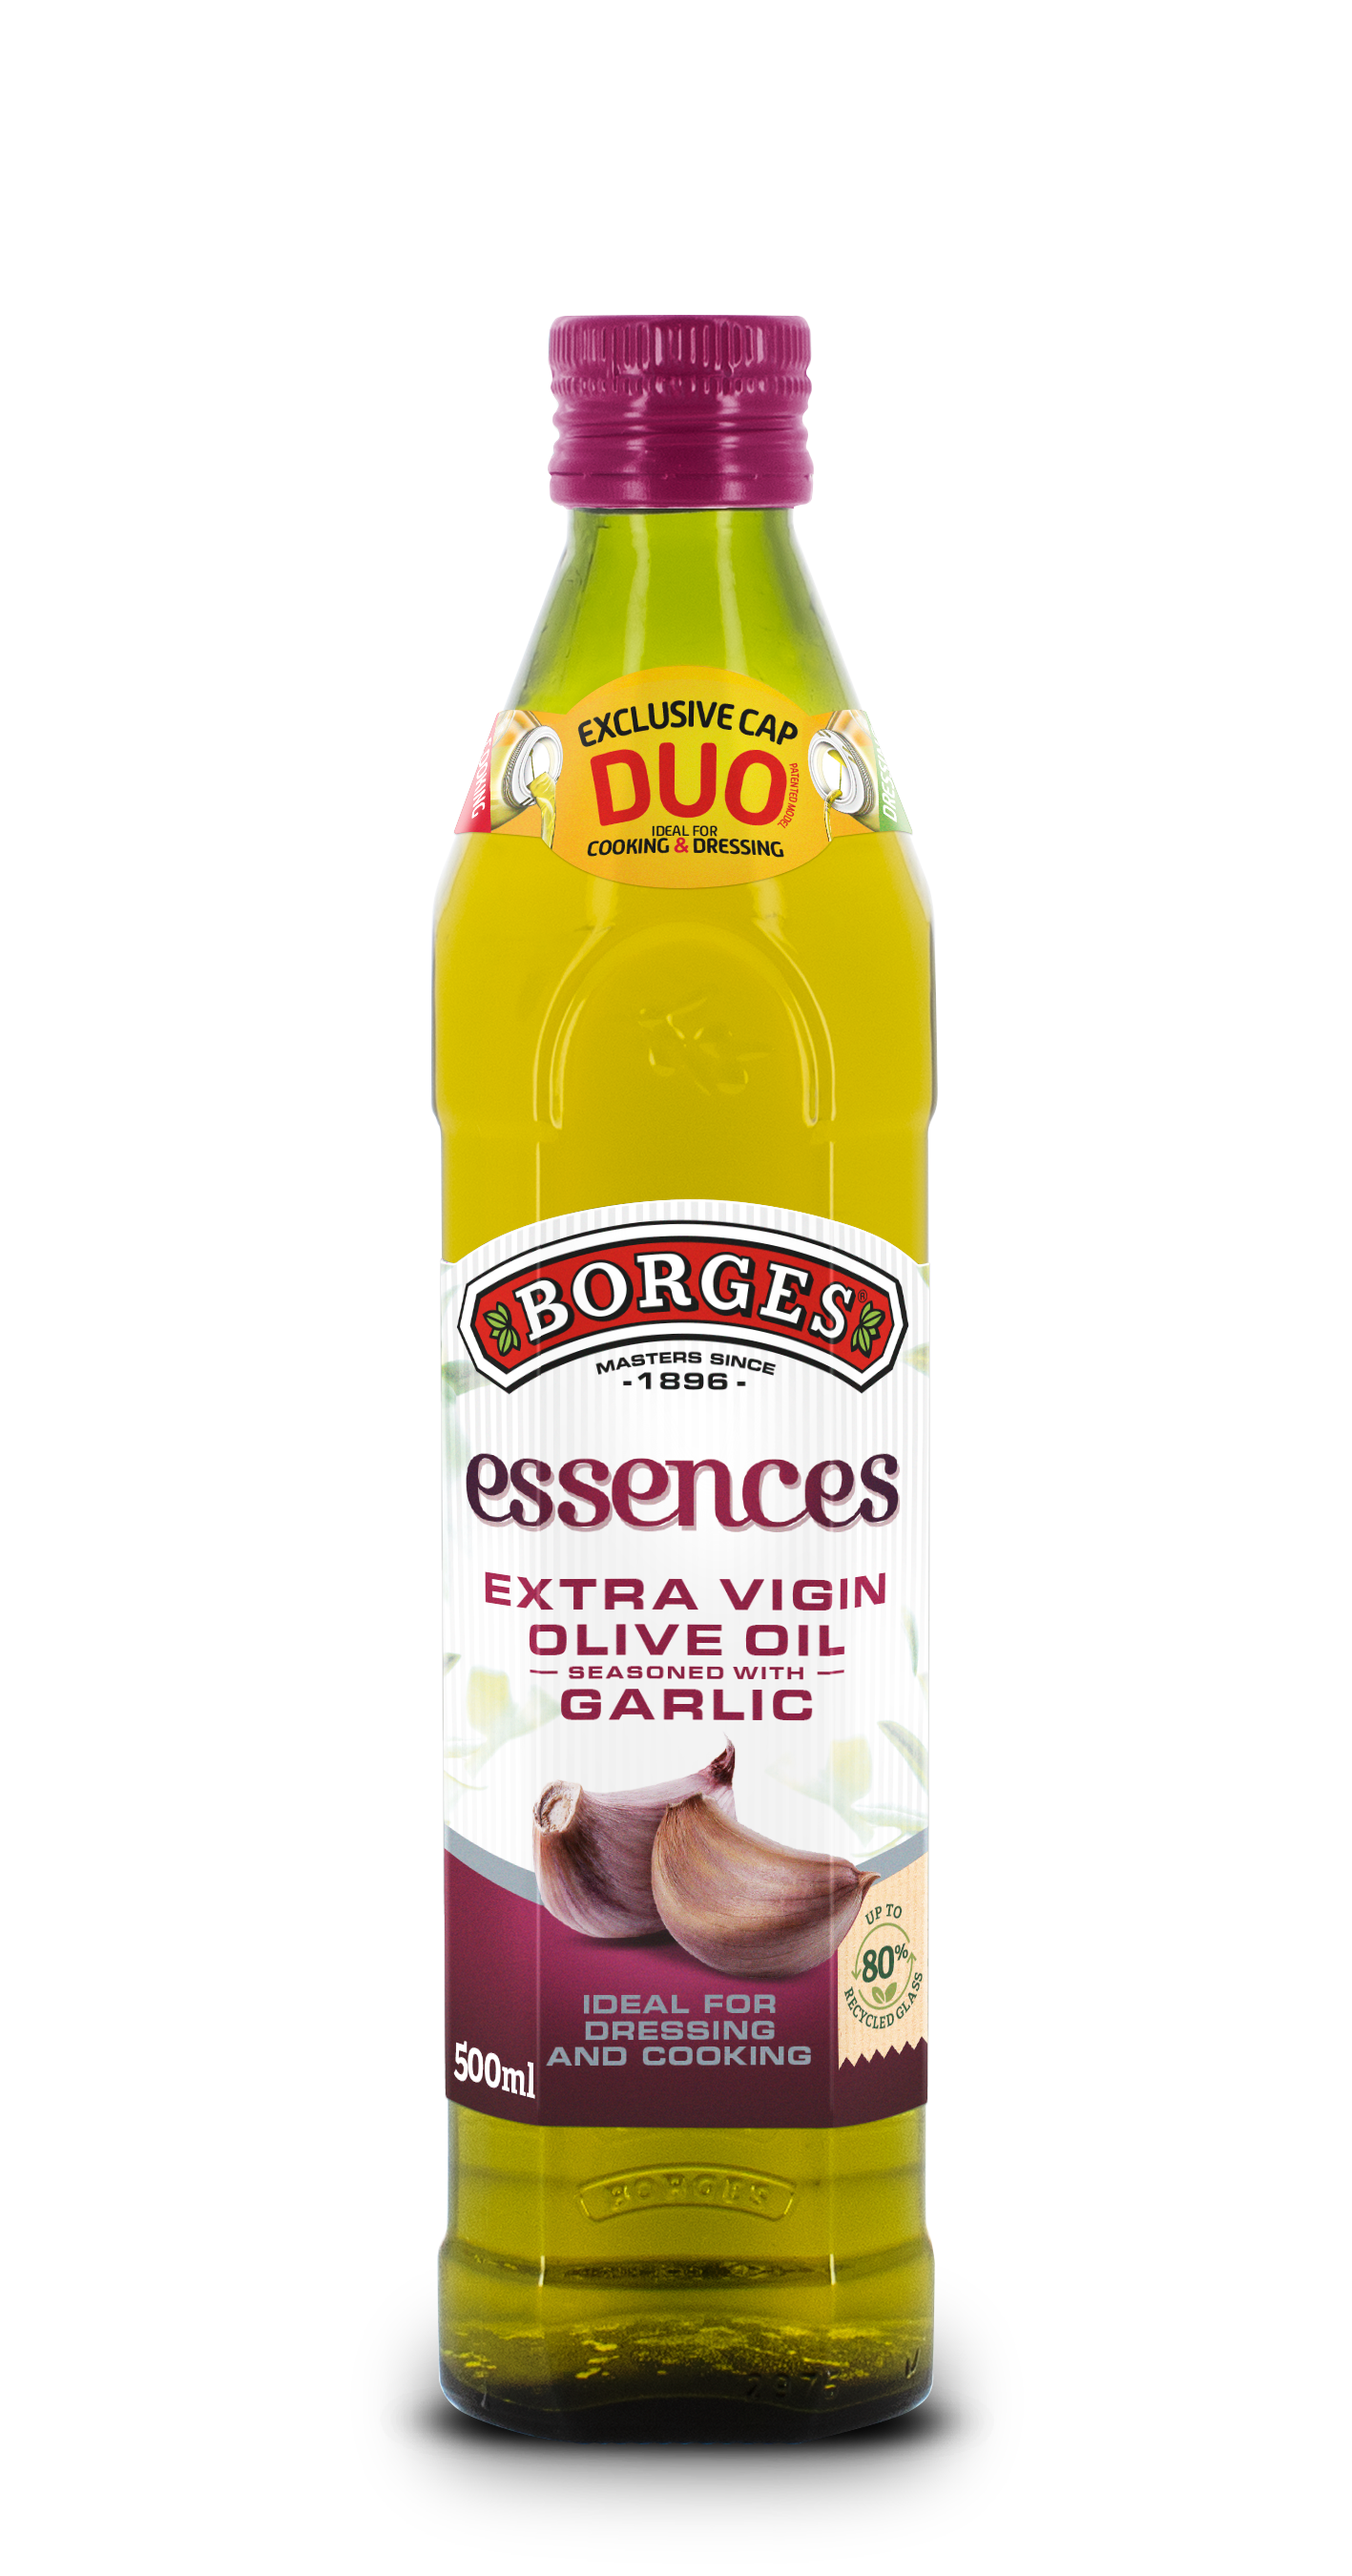 Borges - Extra Virgin Olive Oil Seasoned with Garlic